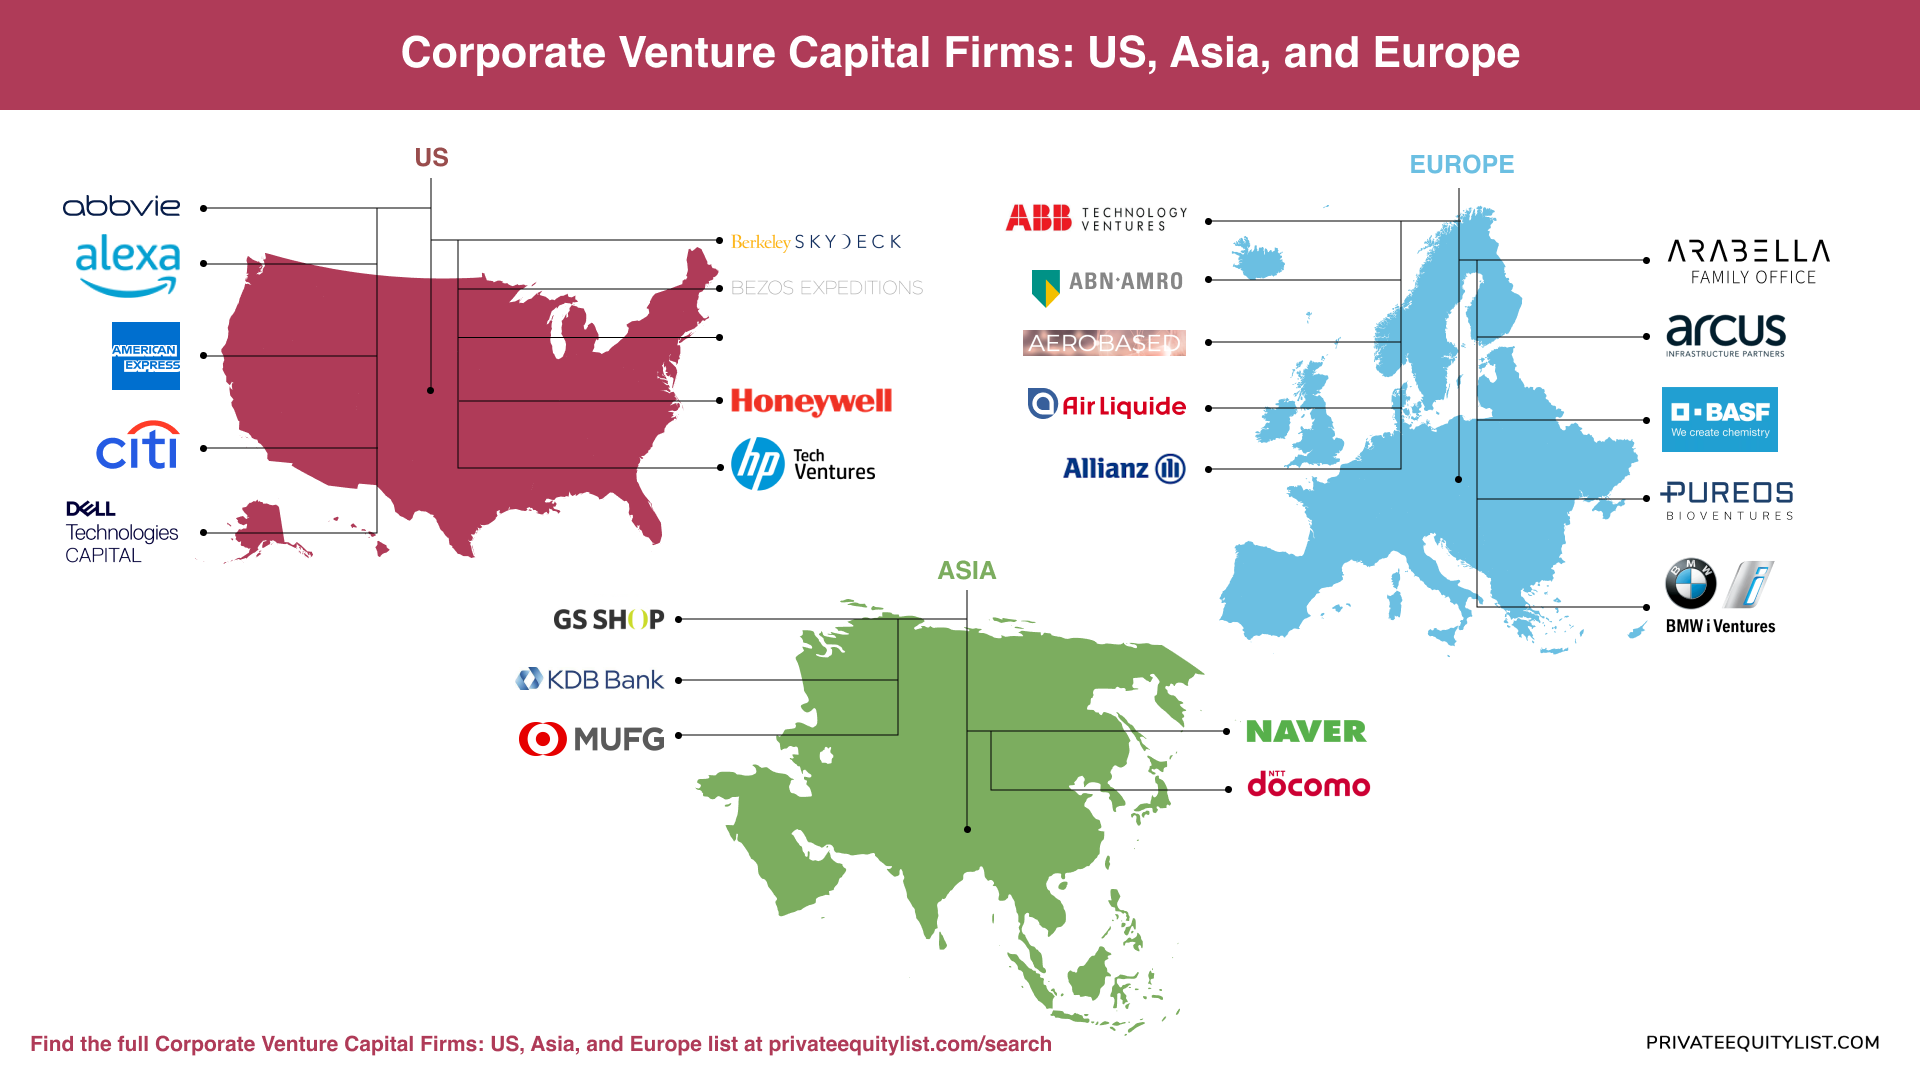 Europe Gaming private equity and venture capital (PE & VC) Funds market map